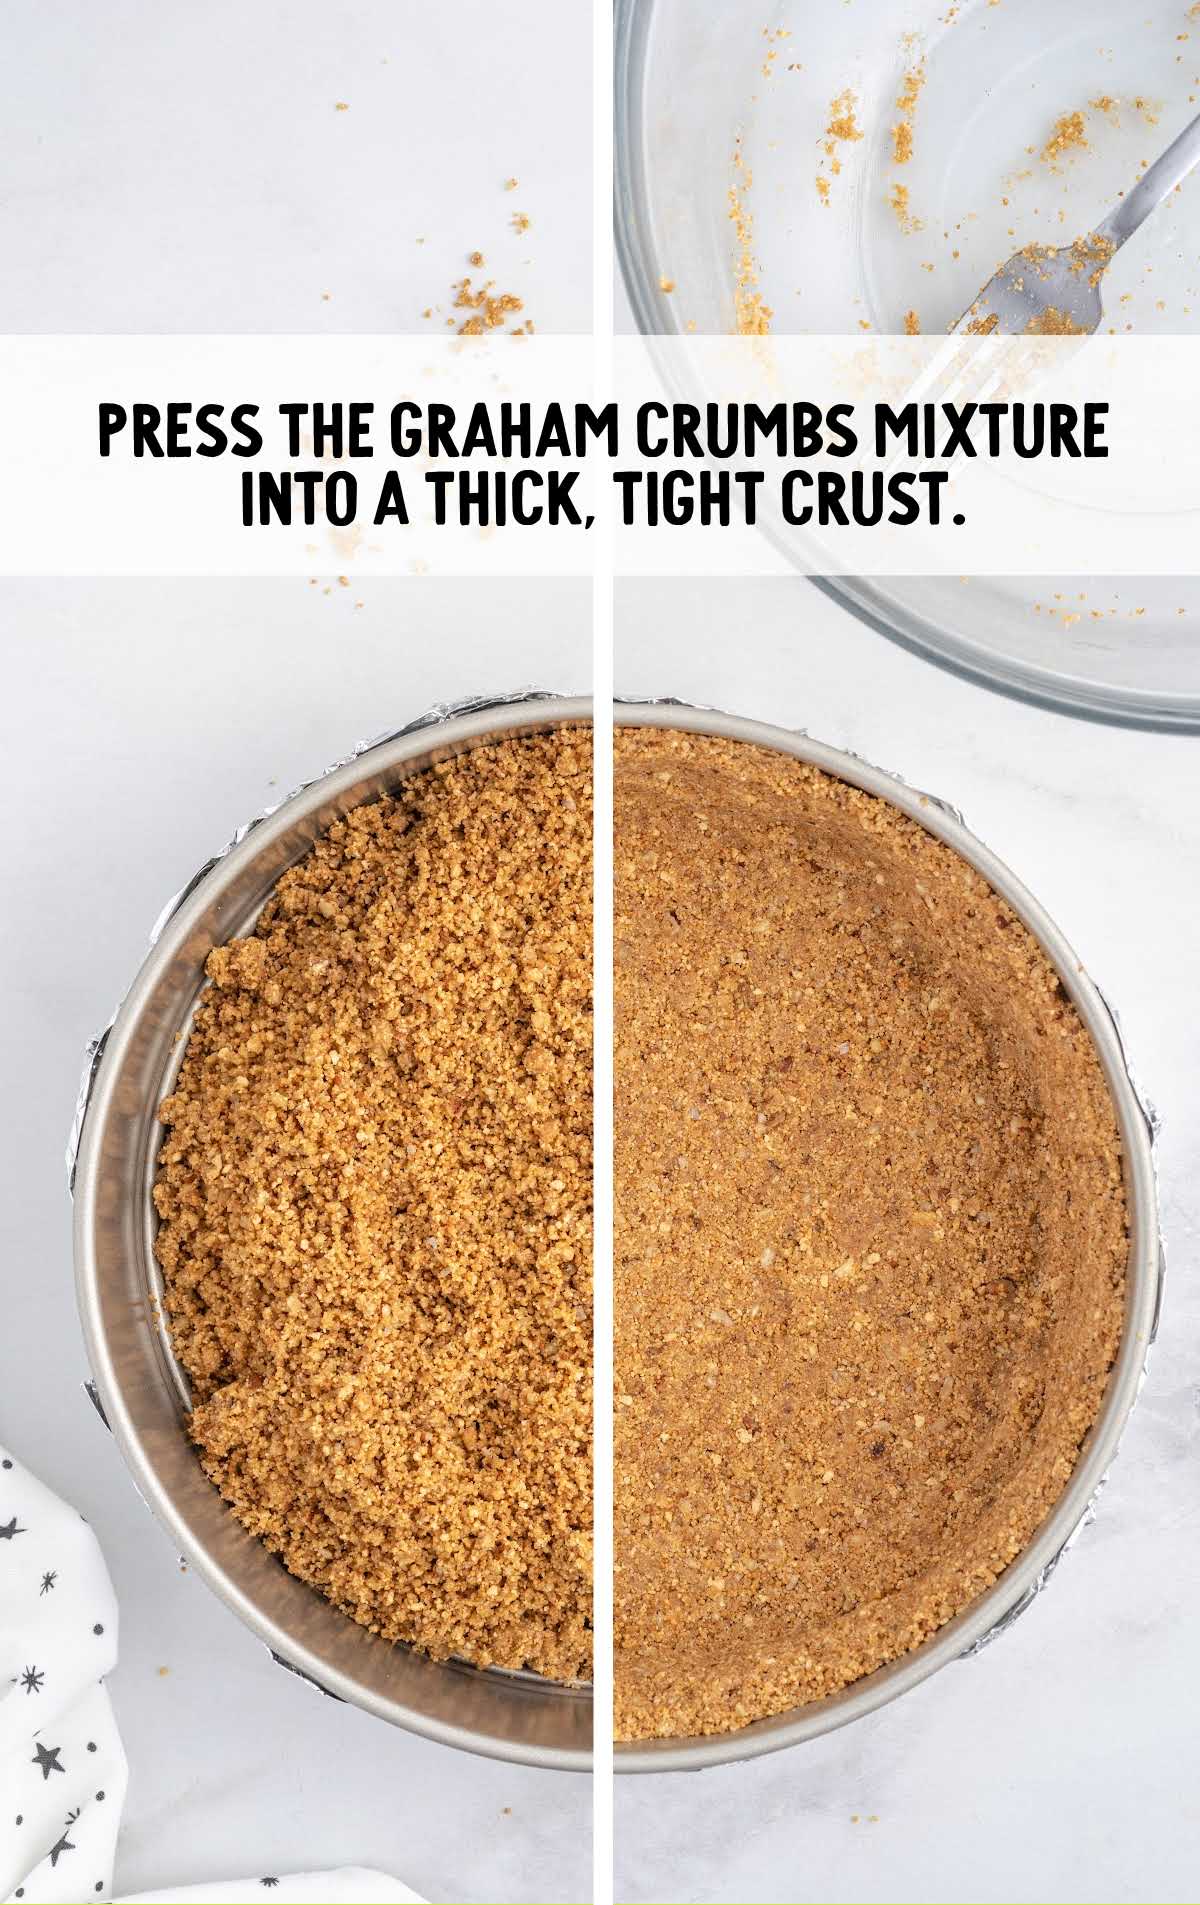 graham crumbs mixture pressed into a thick tight crust